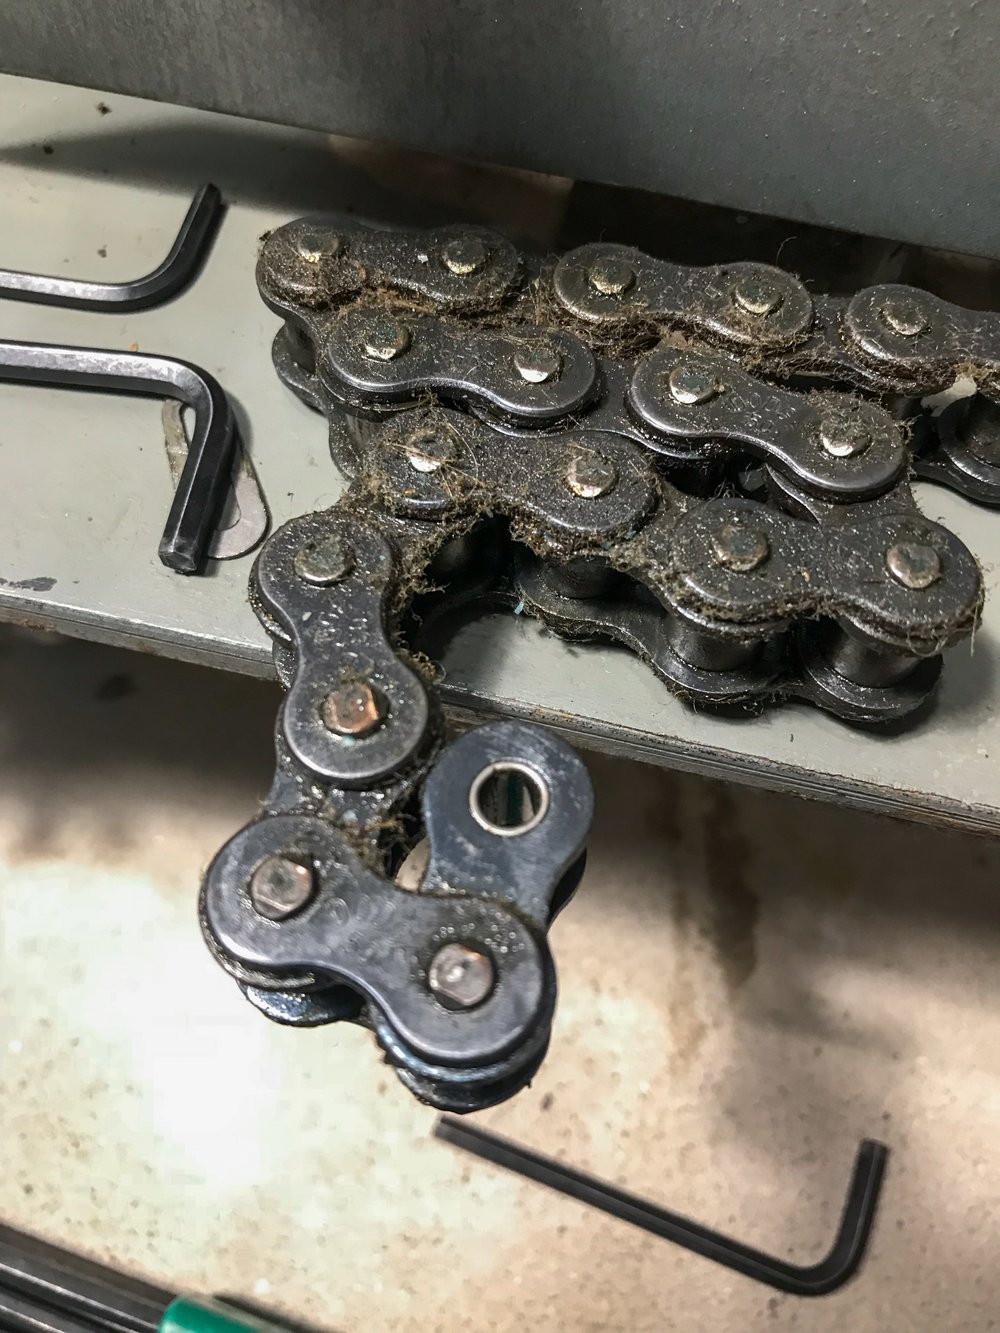  the chain had a lot of dust and lint that needed to be cleaned out.  